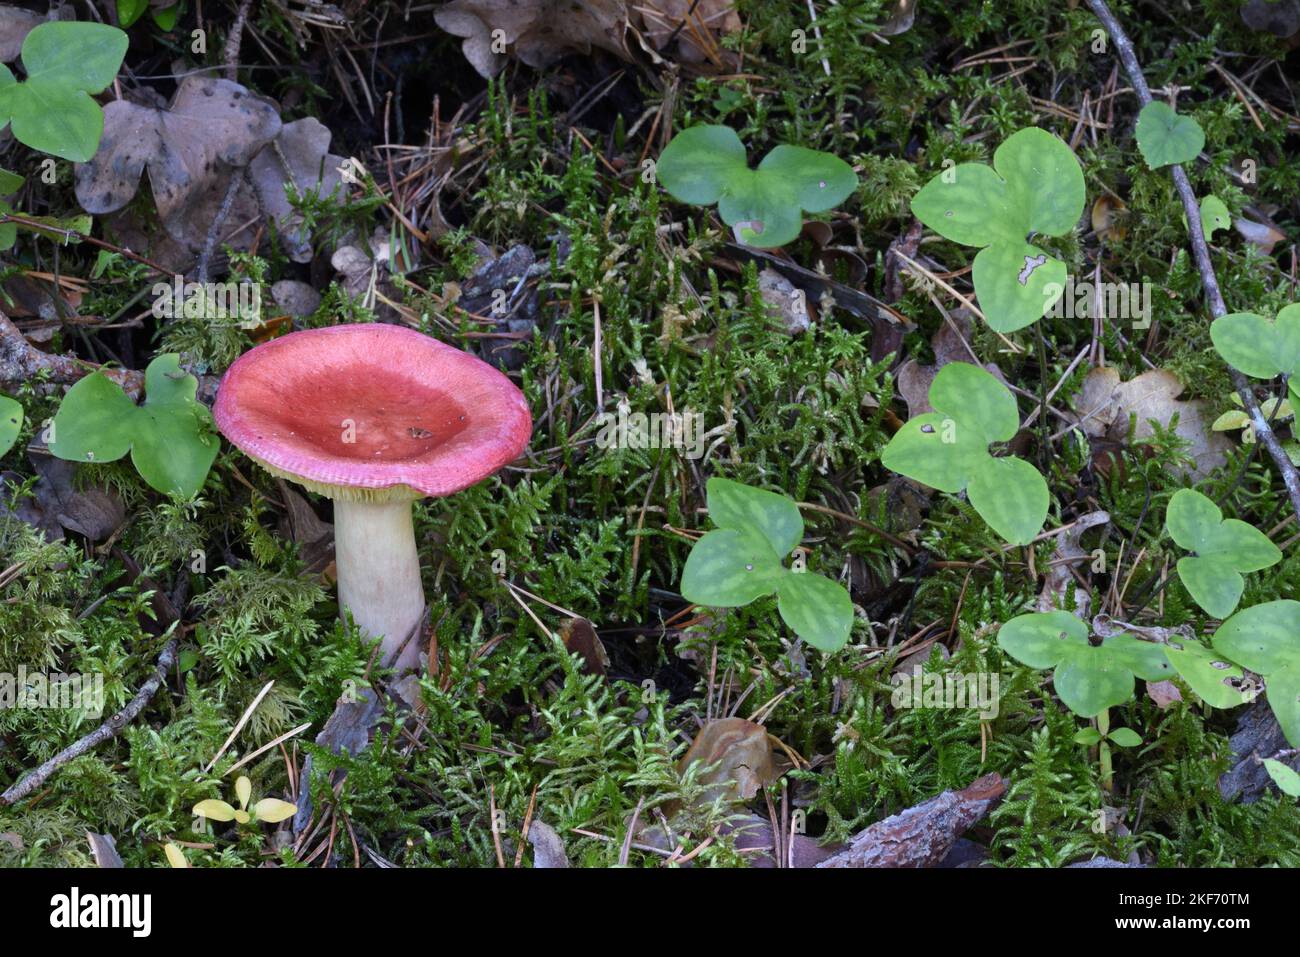 Gooseberry russula queletii mushroom or Fungi Growing in Moss on Forest Floor & 3-lobed Leaves of Common Hepatica, Anemone hepatica, aka Liverwort Stock Photo